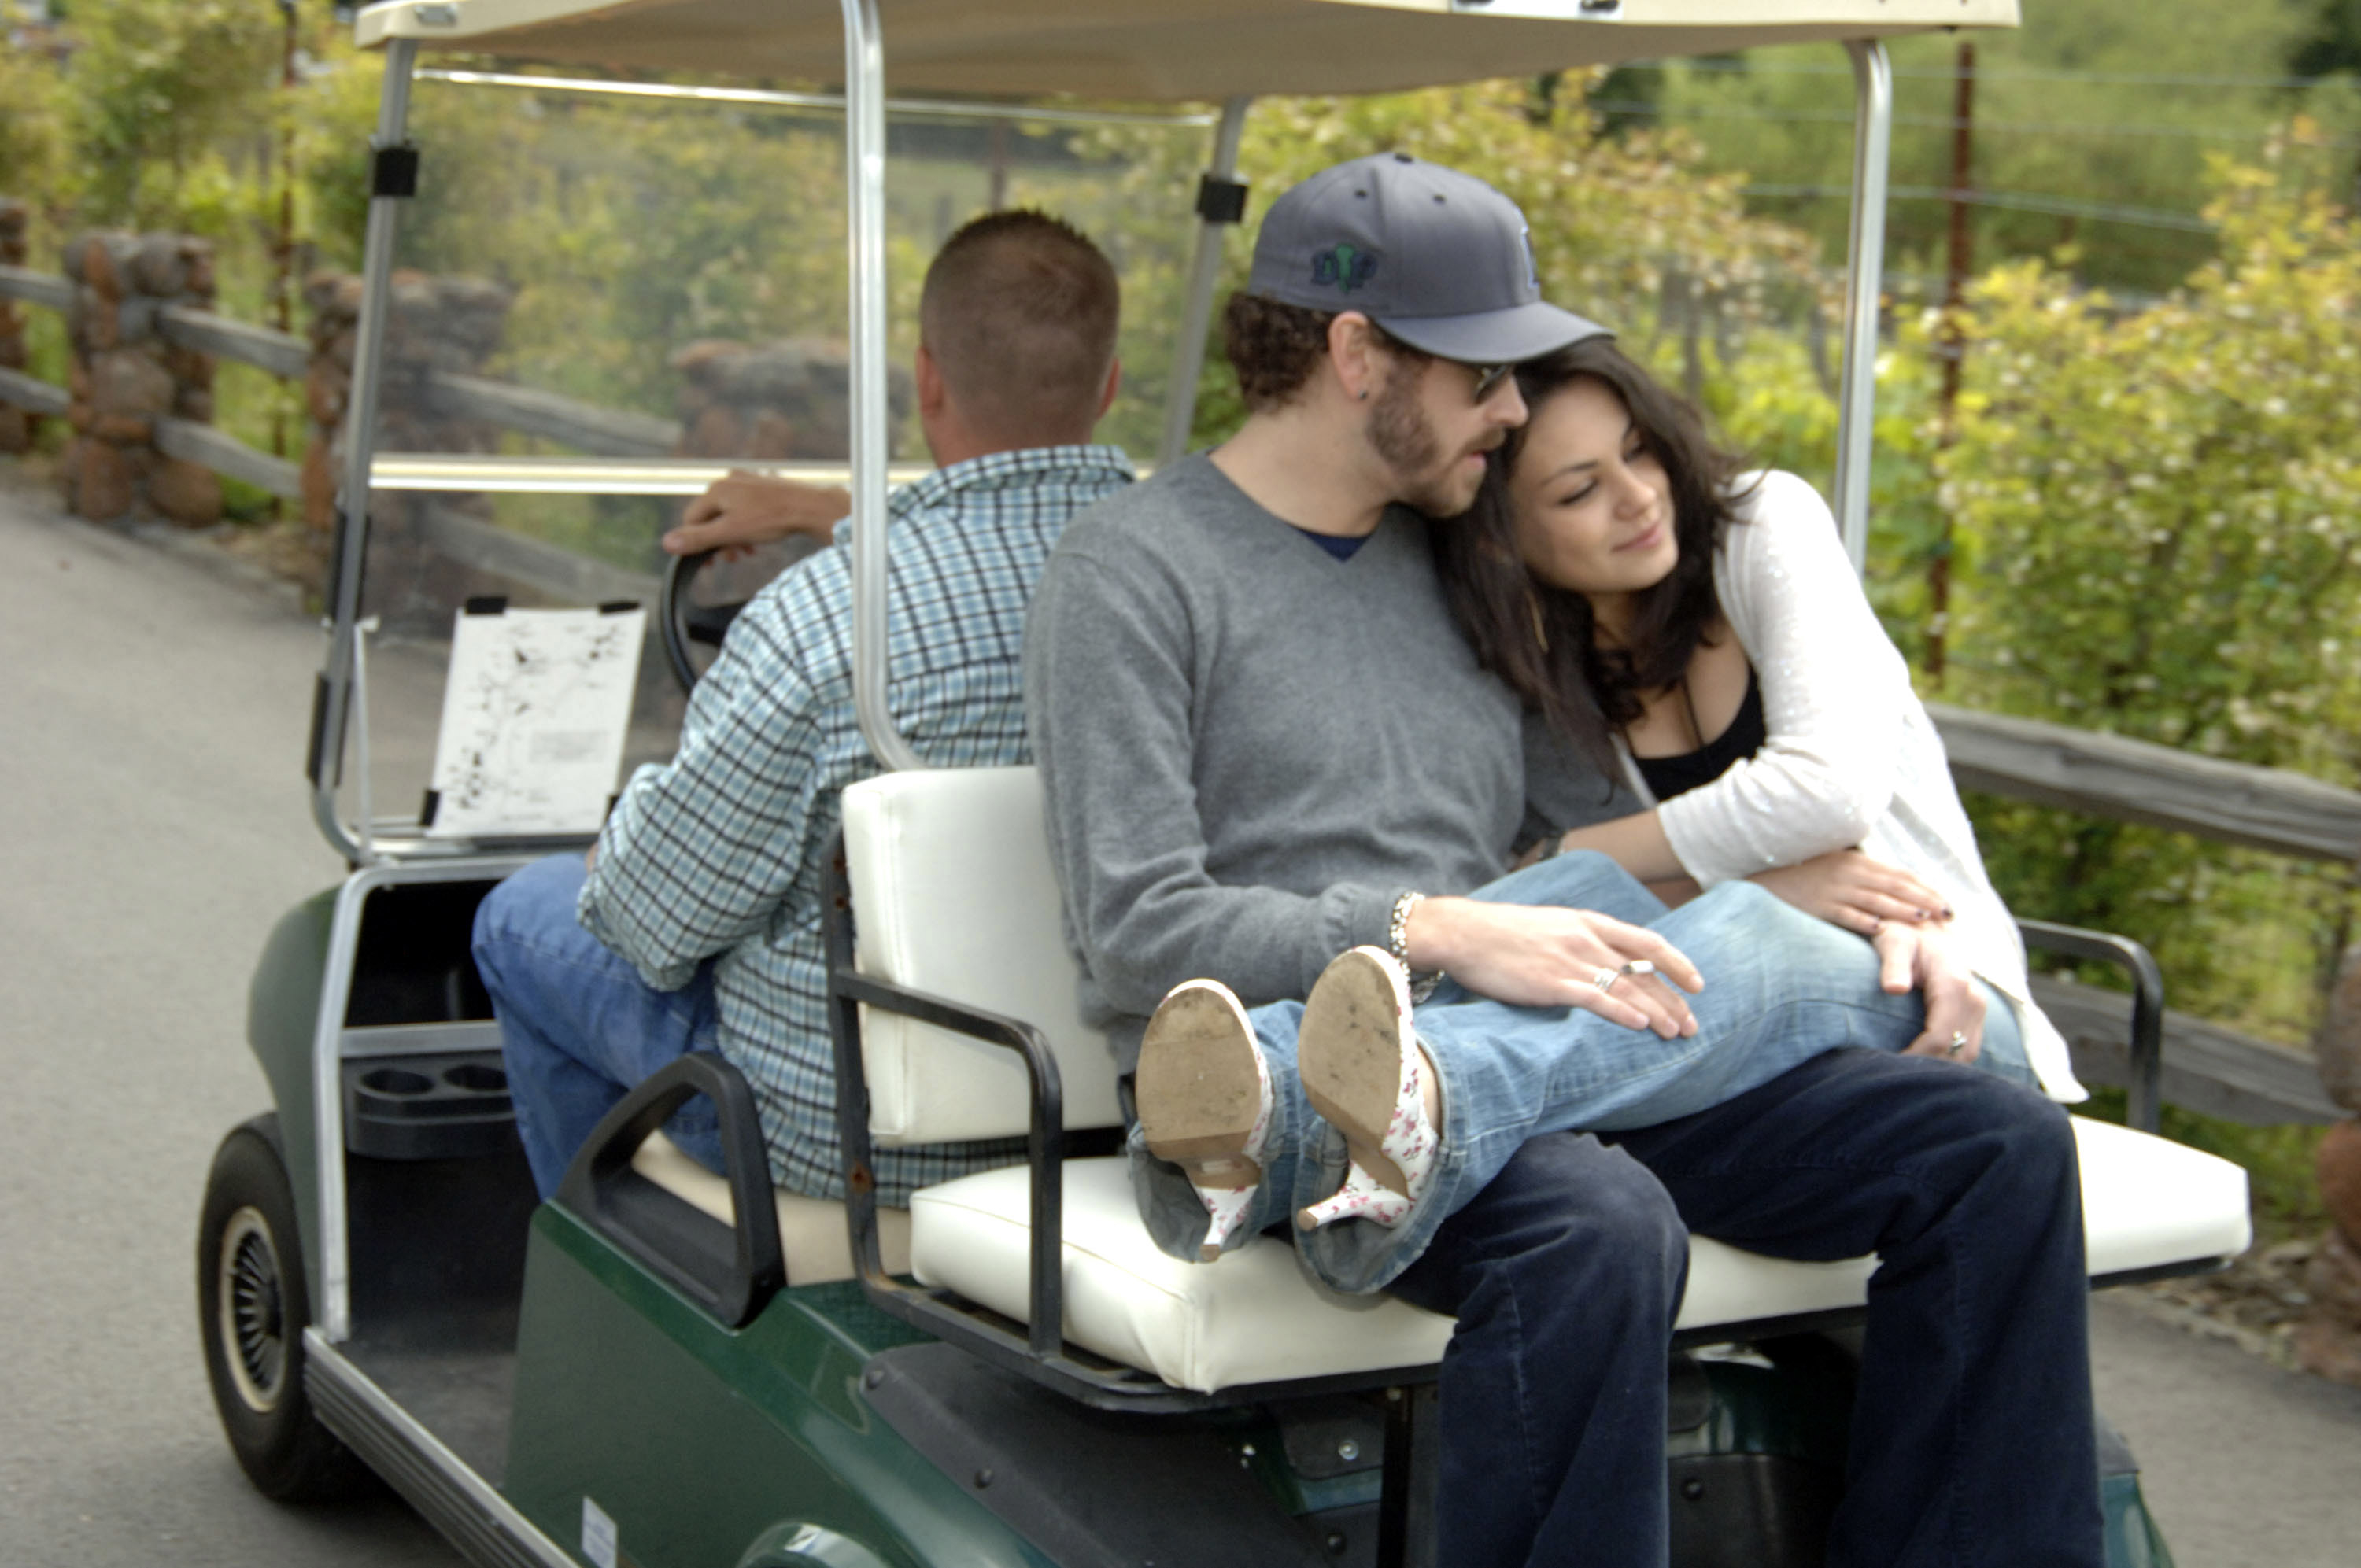 Mila with her legs in Dnny&#x27;s lap as they ride in the back of a golf cart